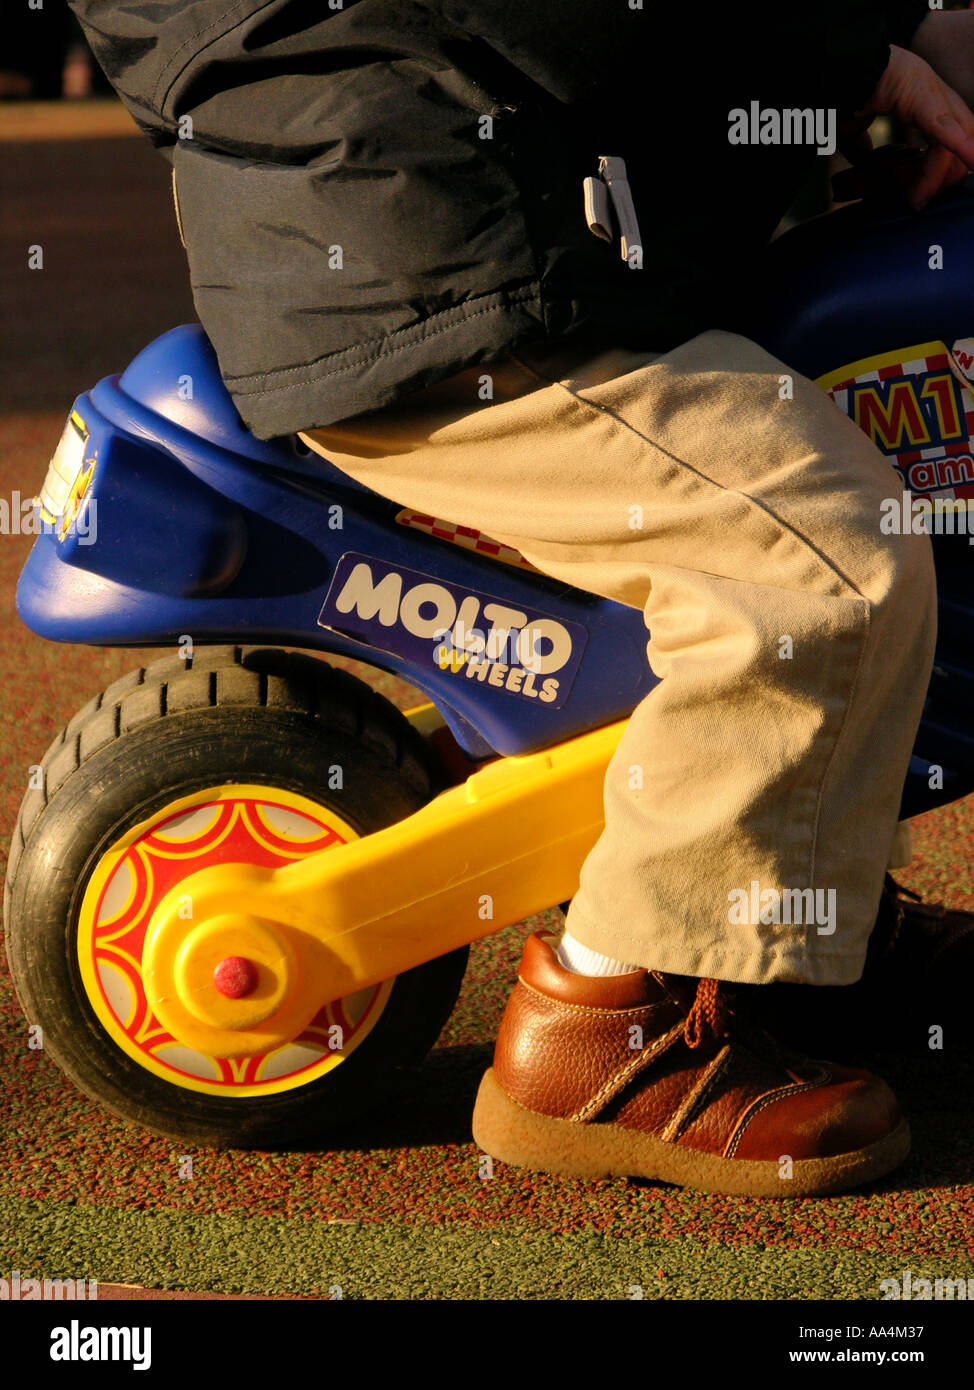 Cropped image of a toddler riding a blue and yellow toy bike Stock Photo